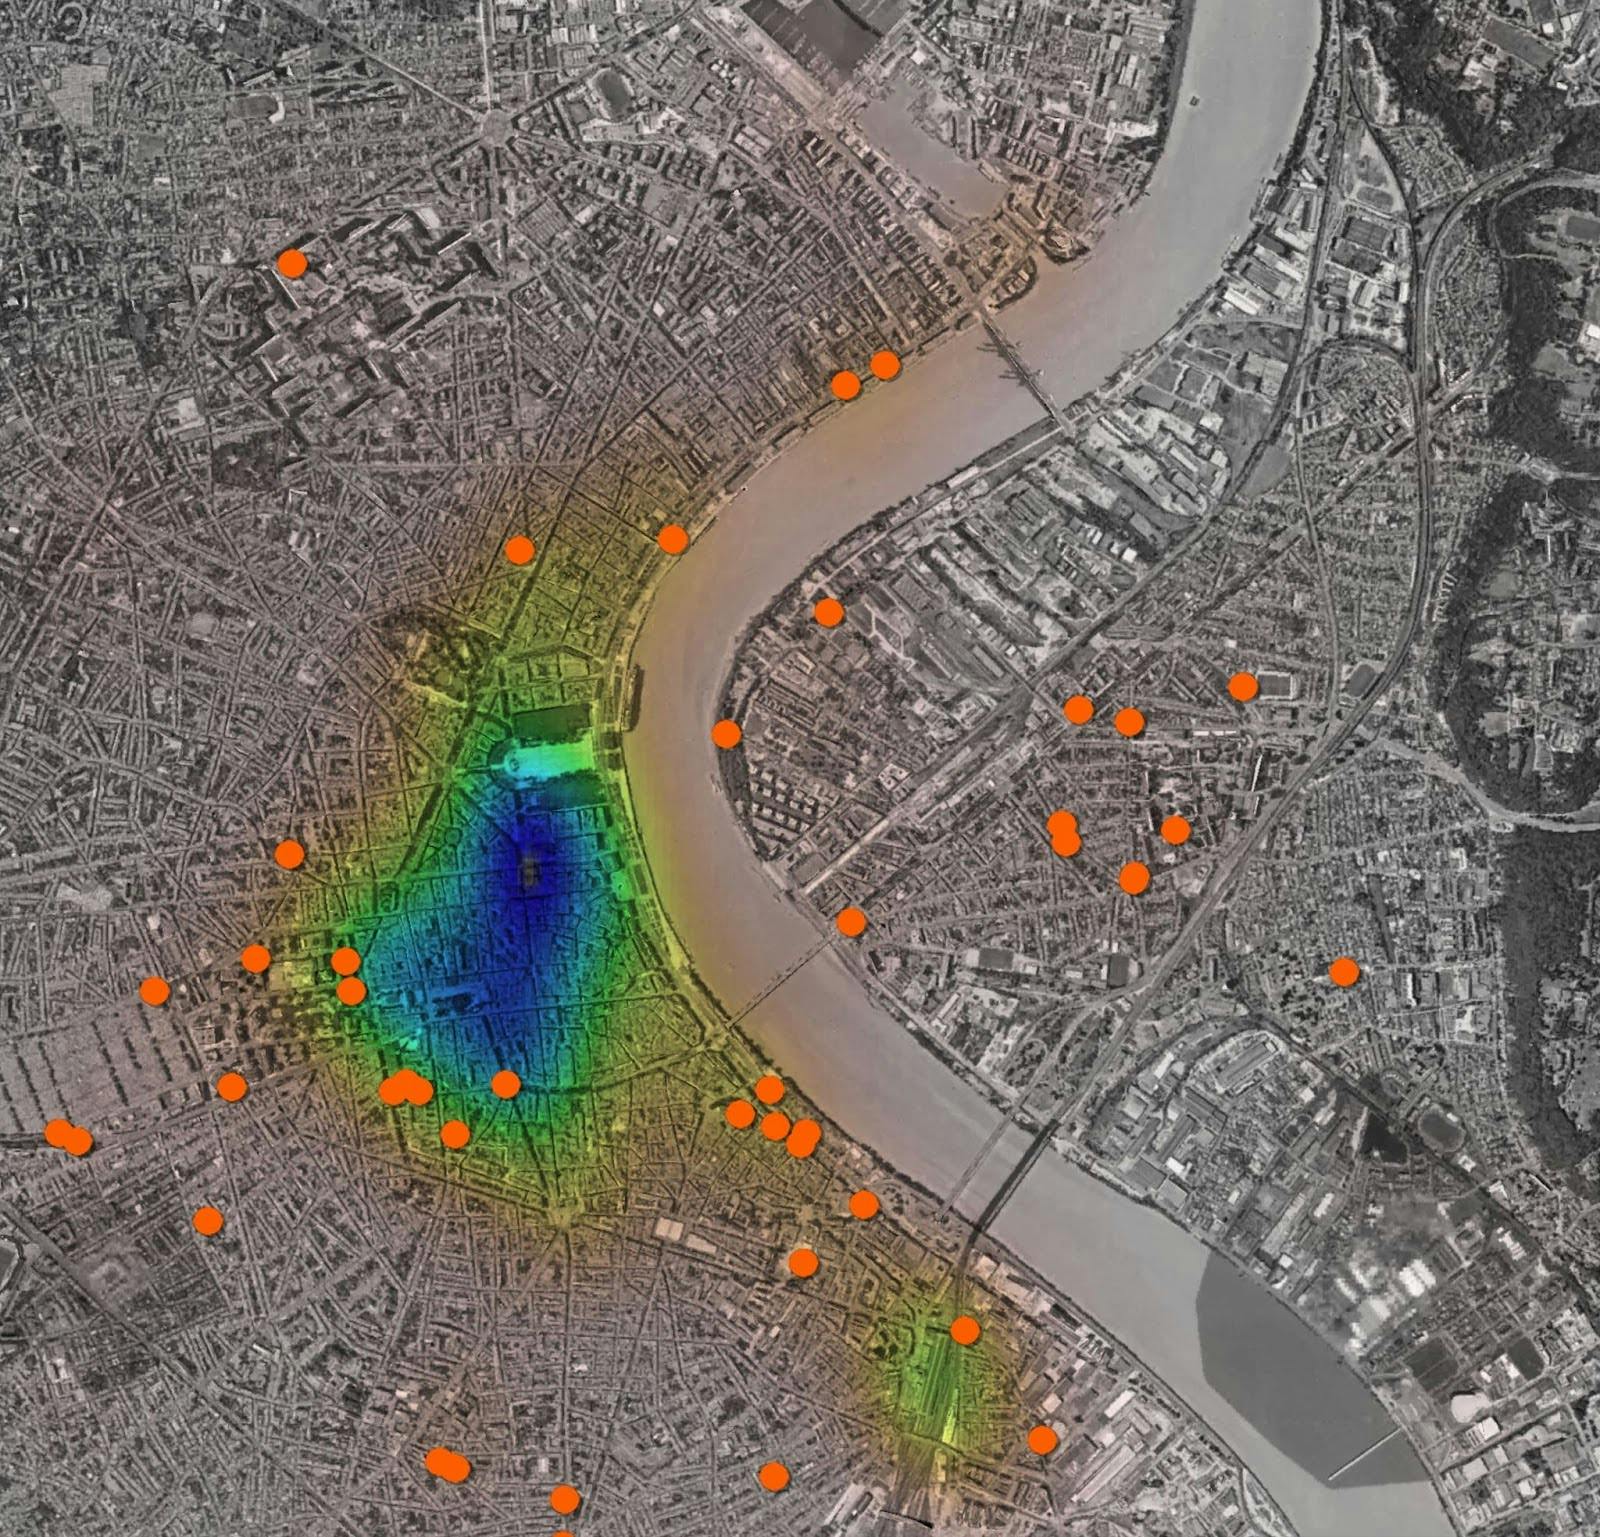 Using algorithms, the teams were able to analyze the difference between the current location of toilets and the areas where users are looking to find them. This analysis makes it possible to recommend potential locations for missing toilets based on the data collected.